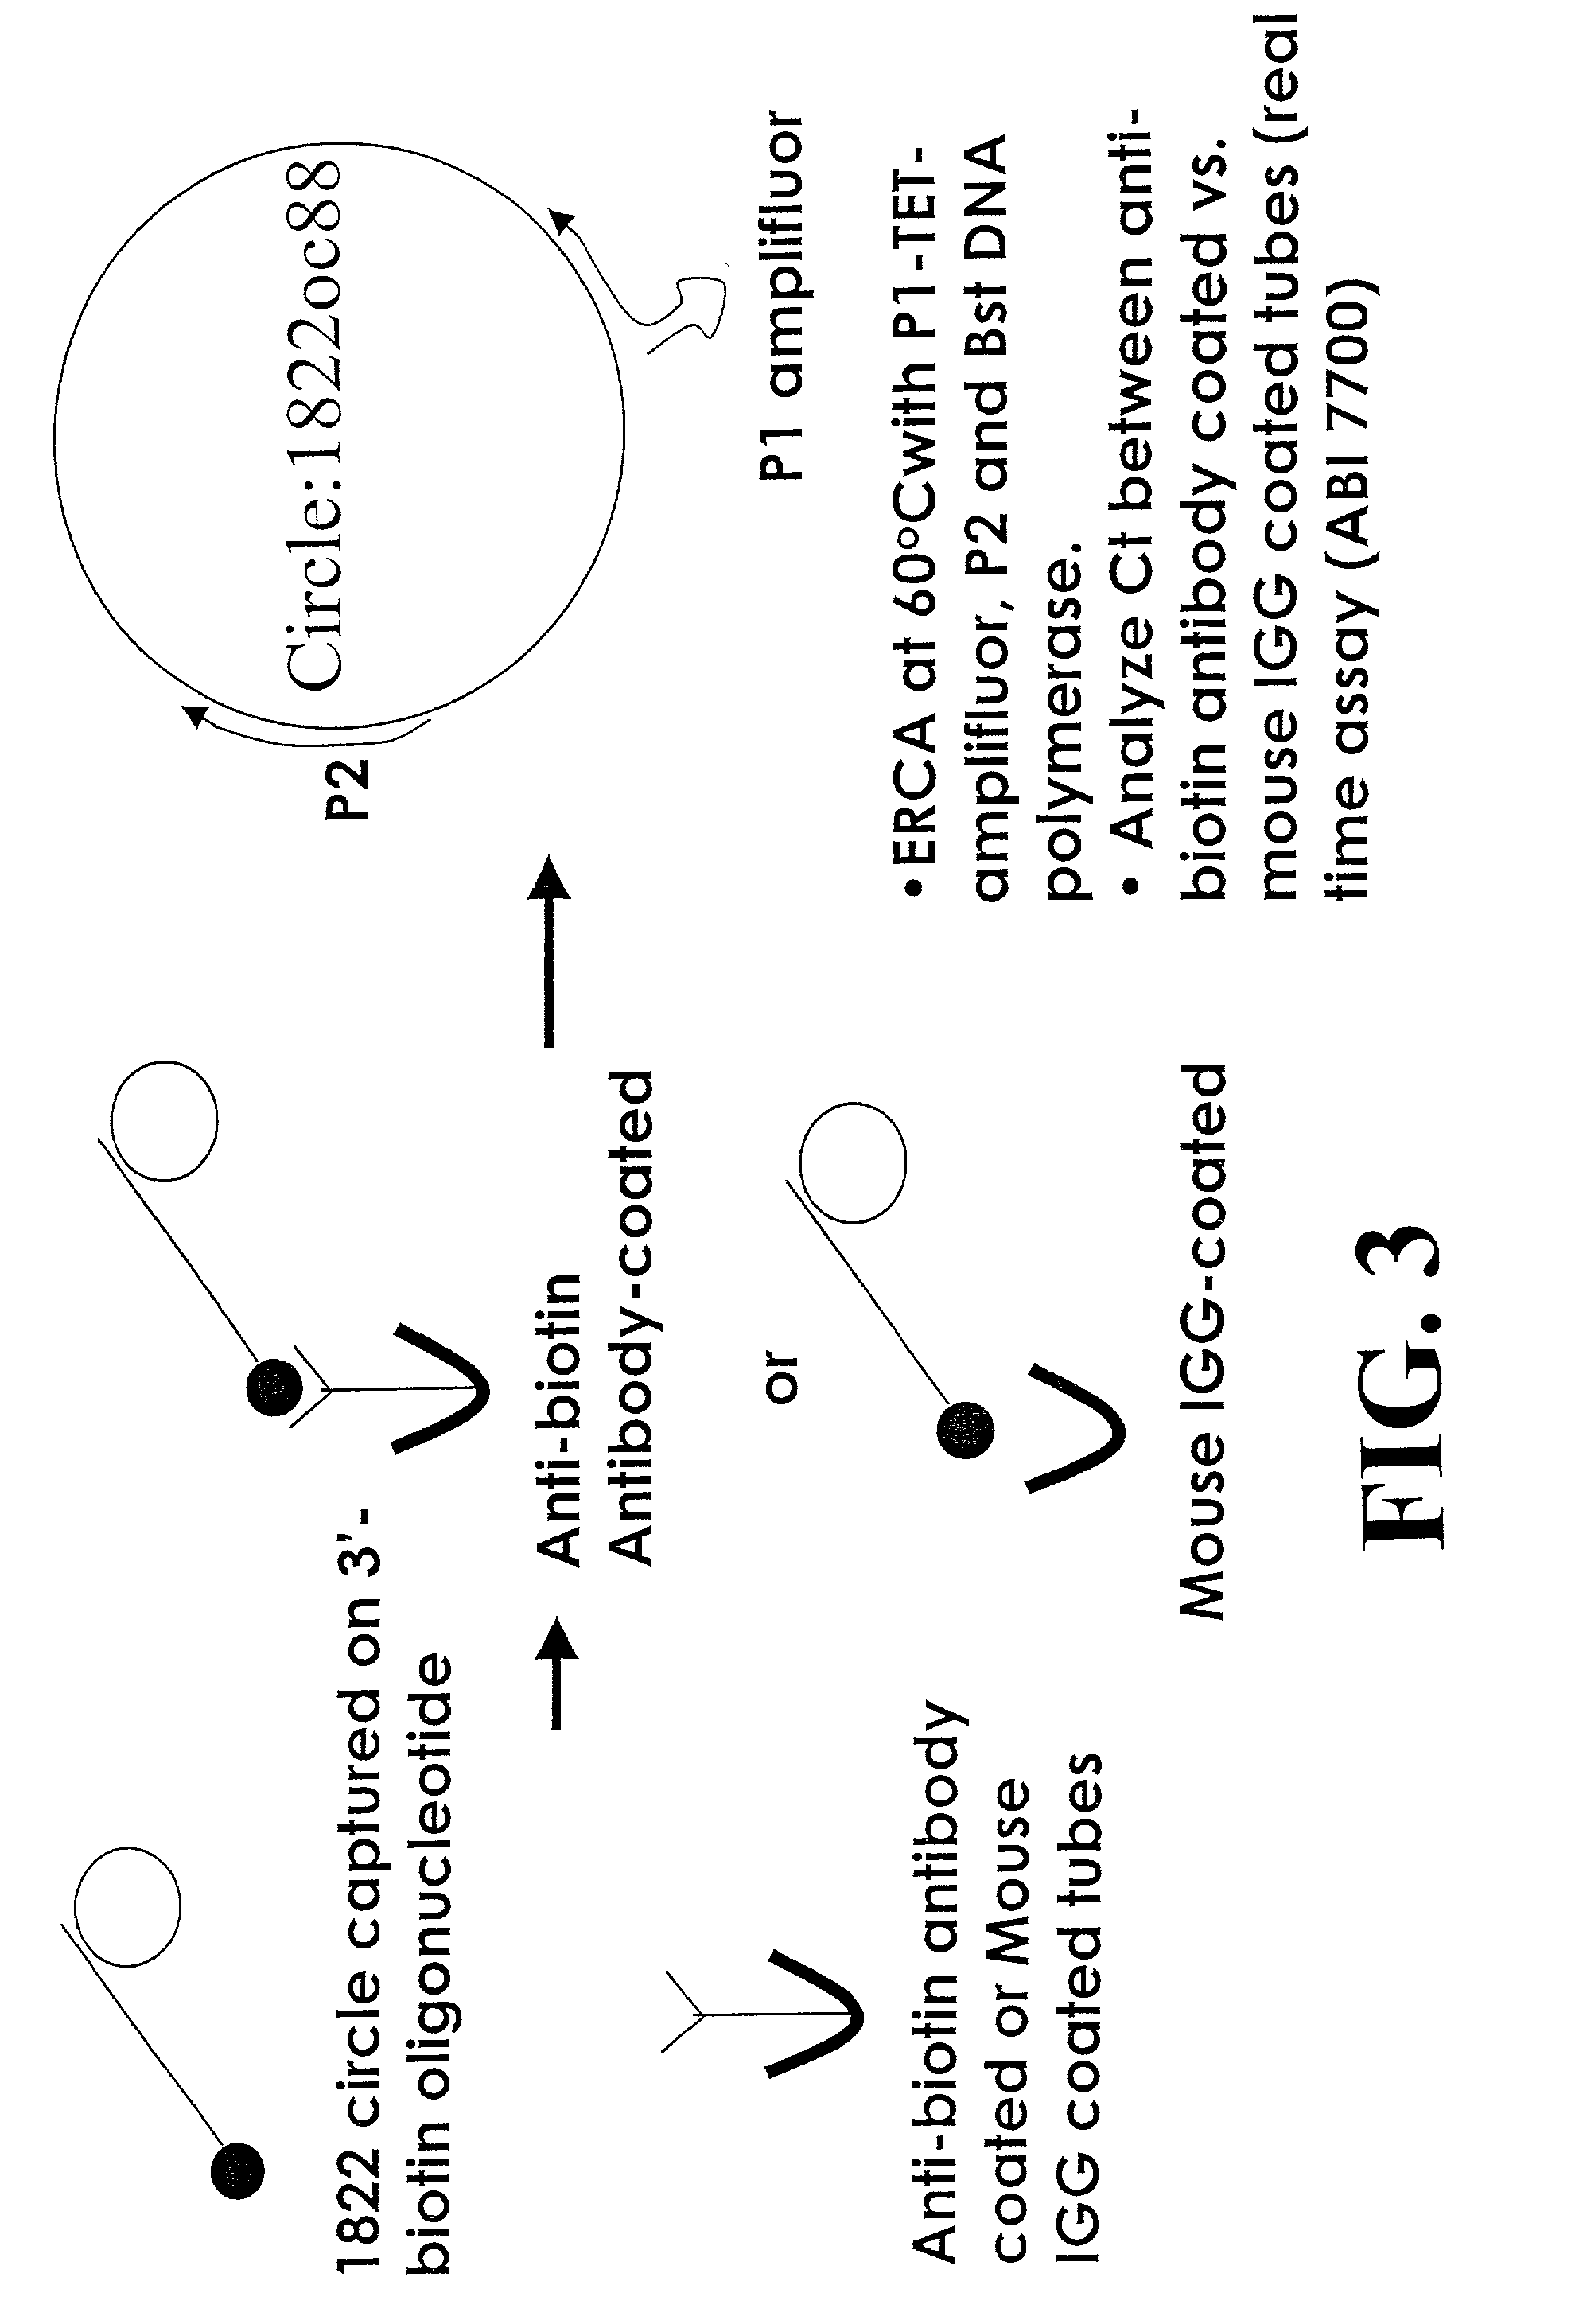 Detection method using dissociated rolling circle amplification